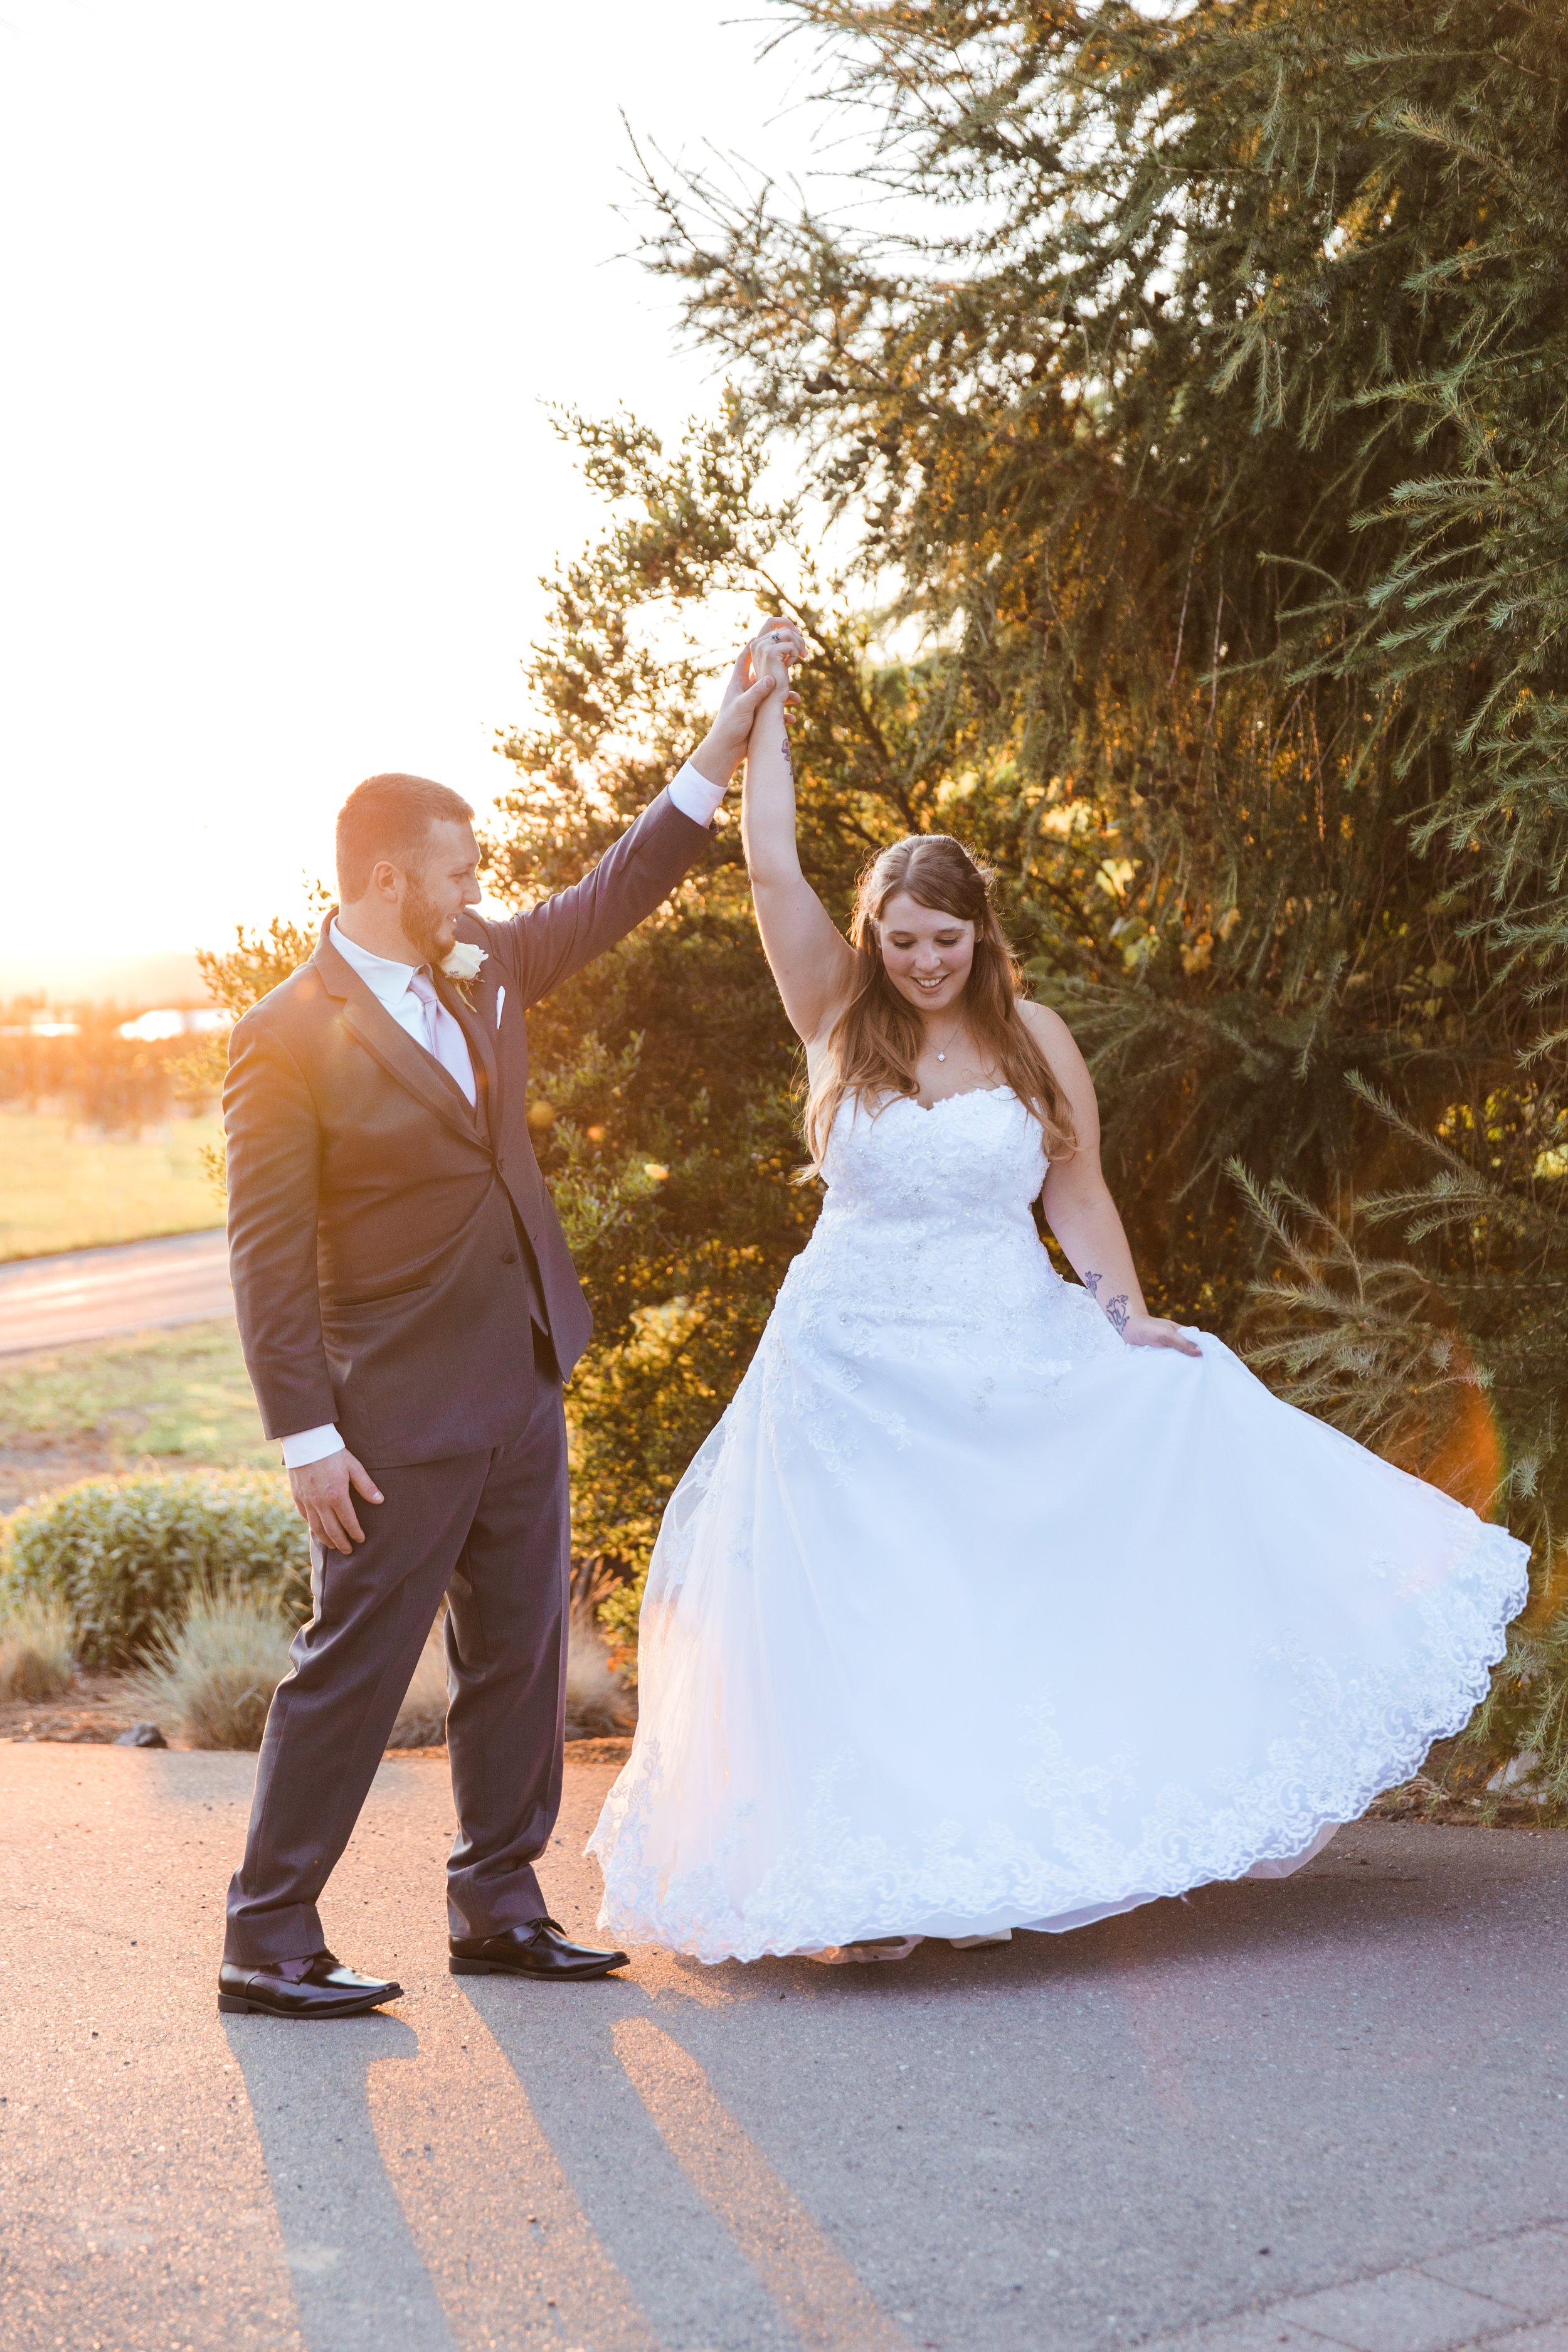  A bride and groom pose at golden hour. The bride is twirling and her dress flares. 